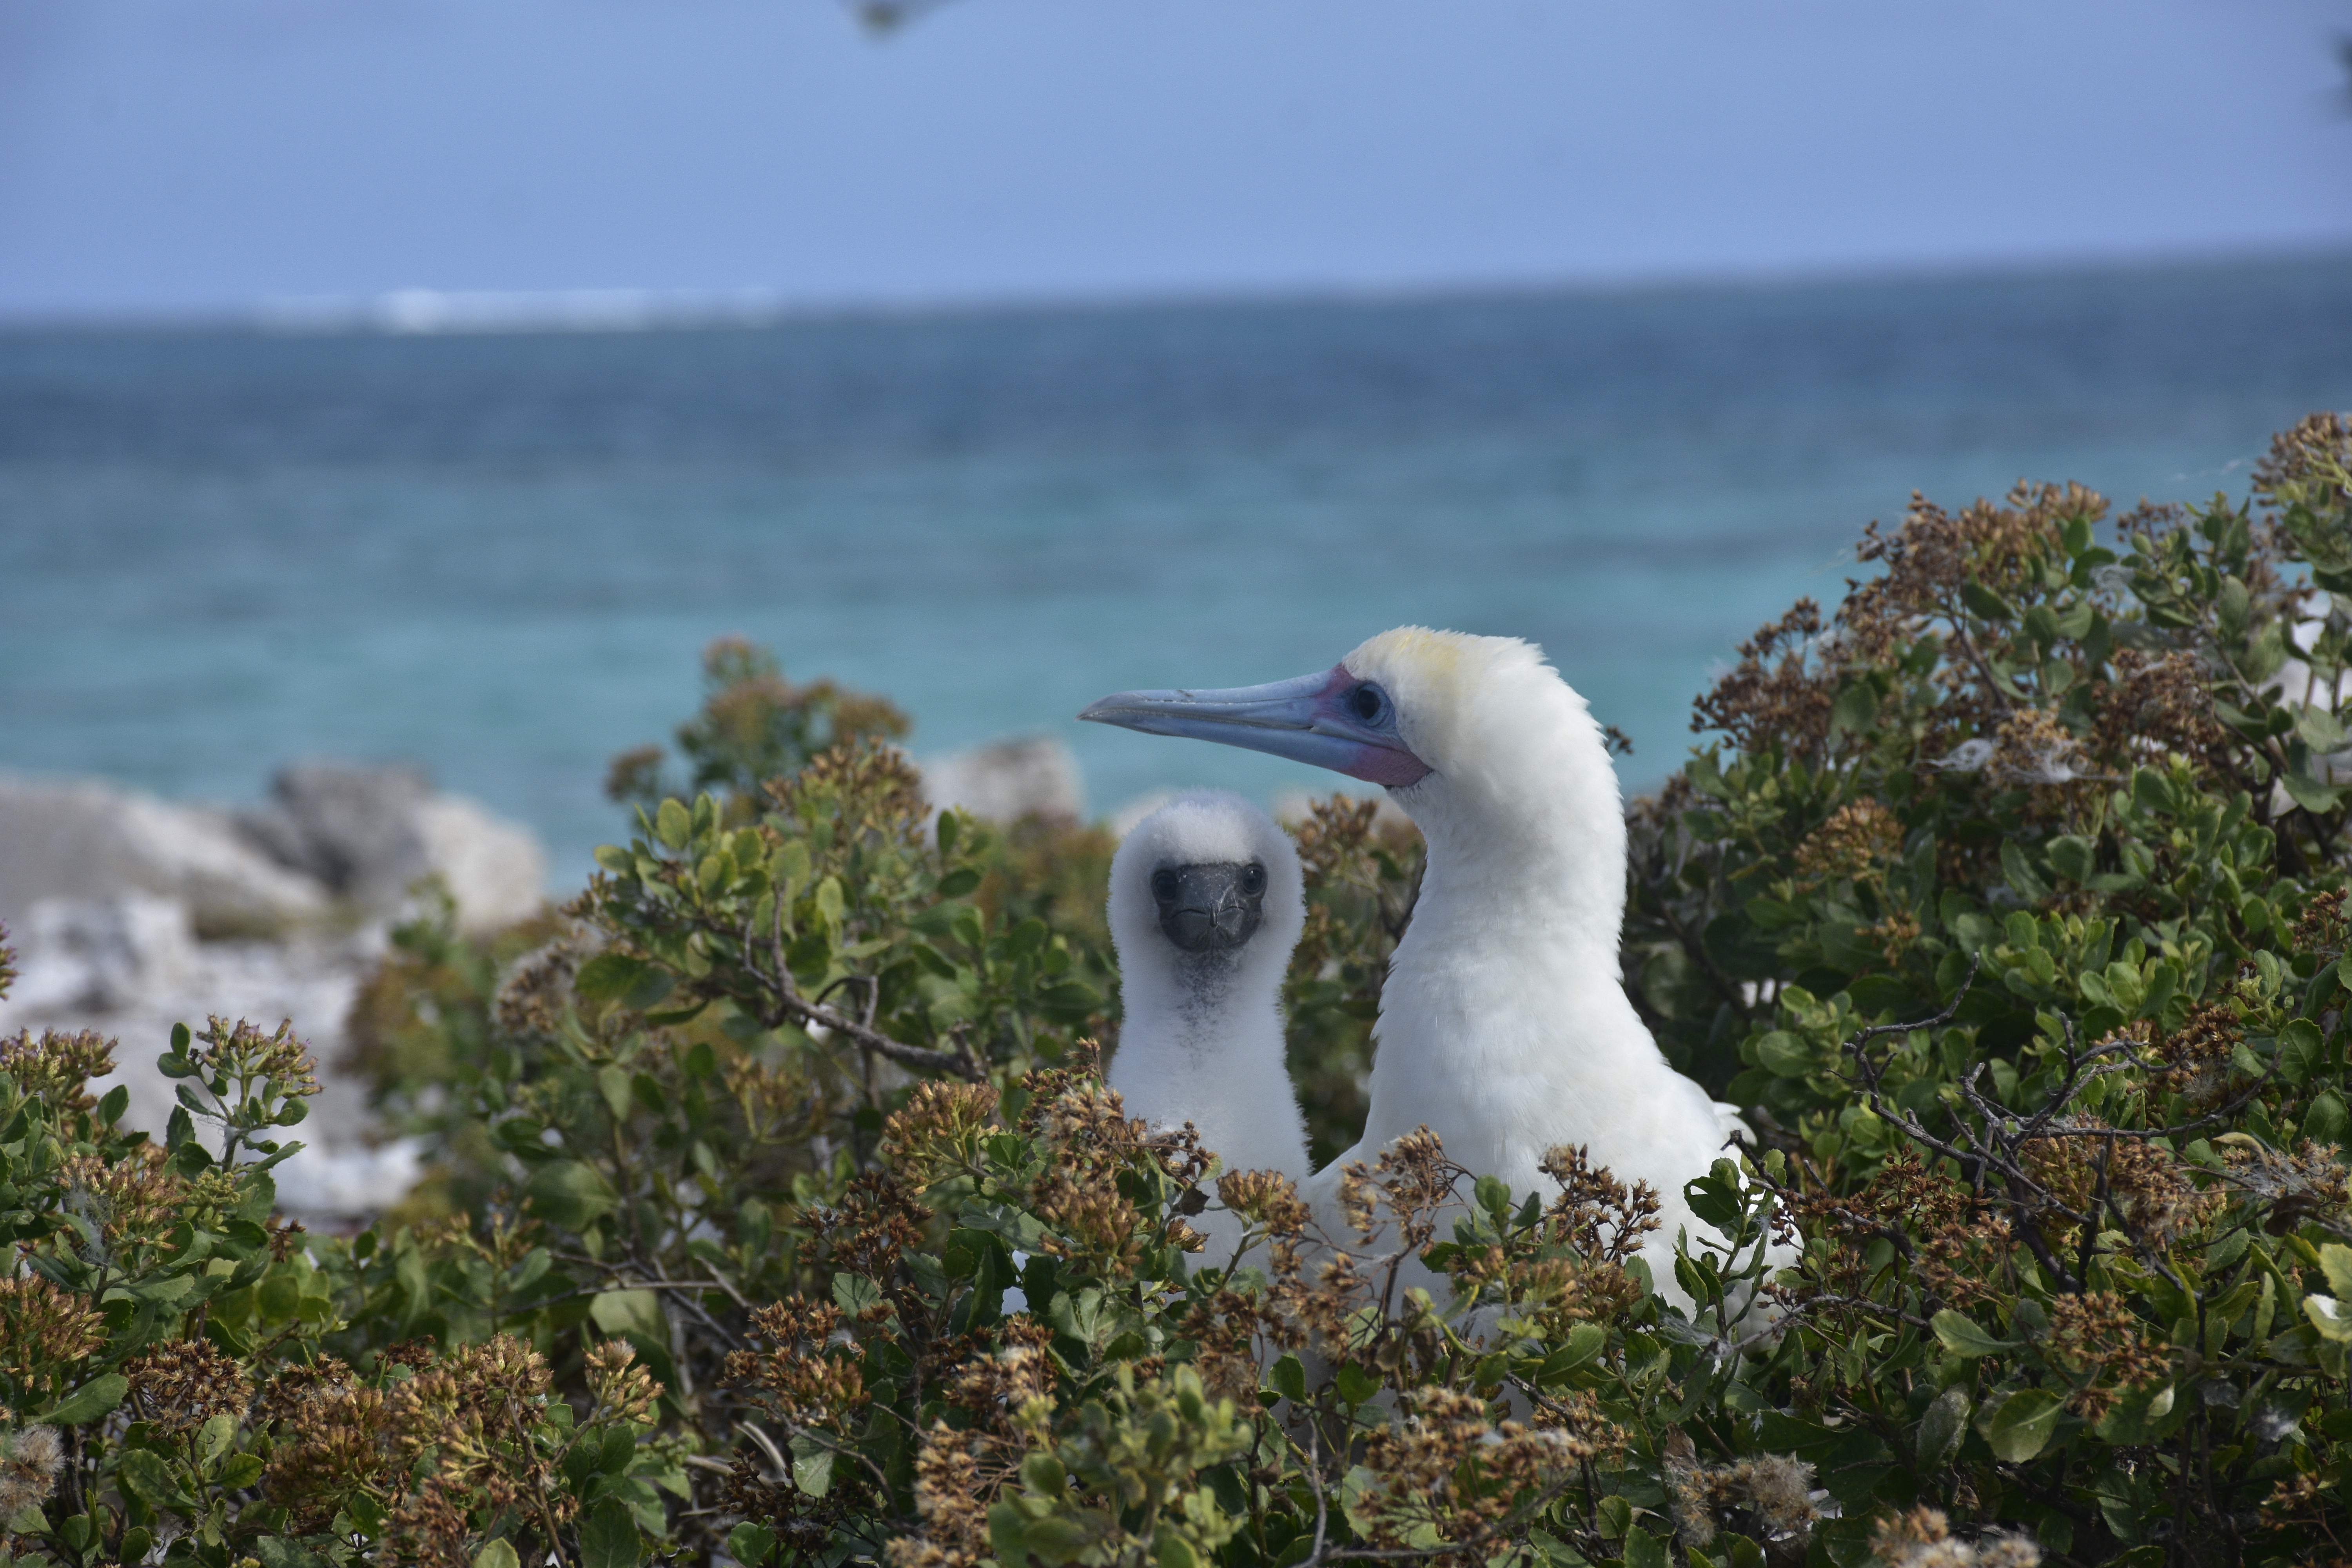 Two red-footed boobies poke their heads out from a bush.